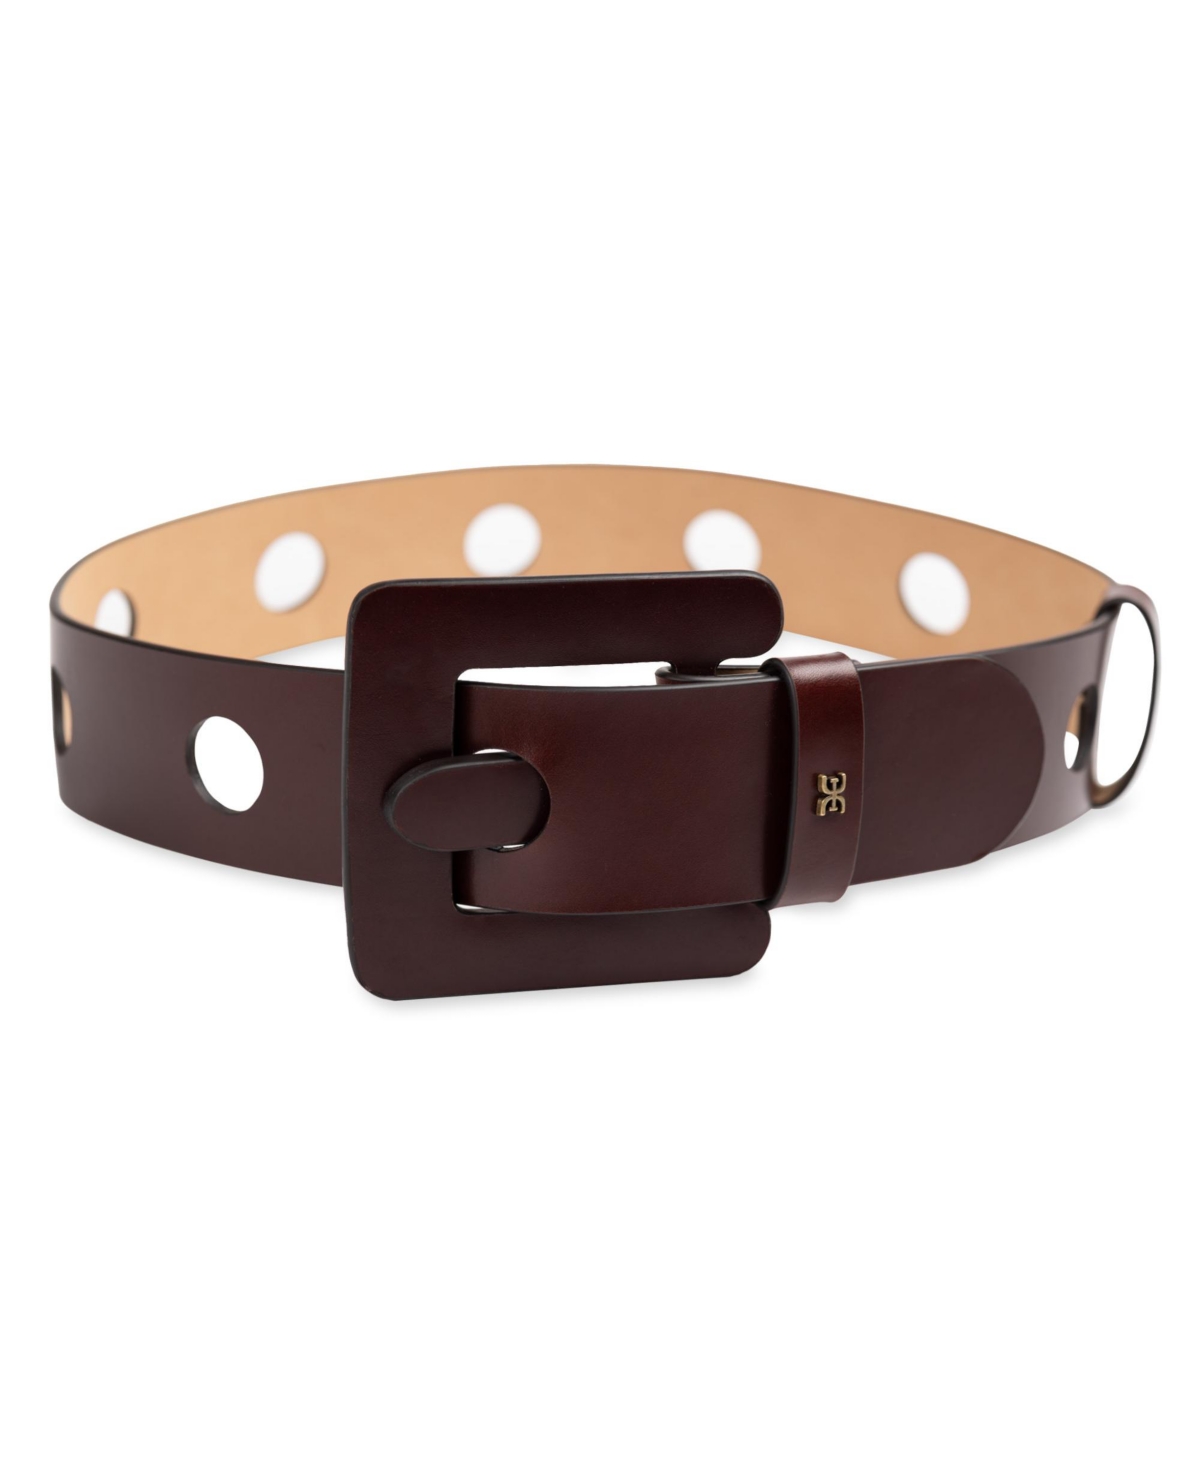 Women's Perforated Leather Belt with Leather Covered Buckle - Brown